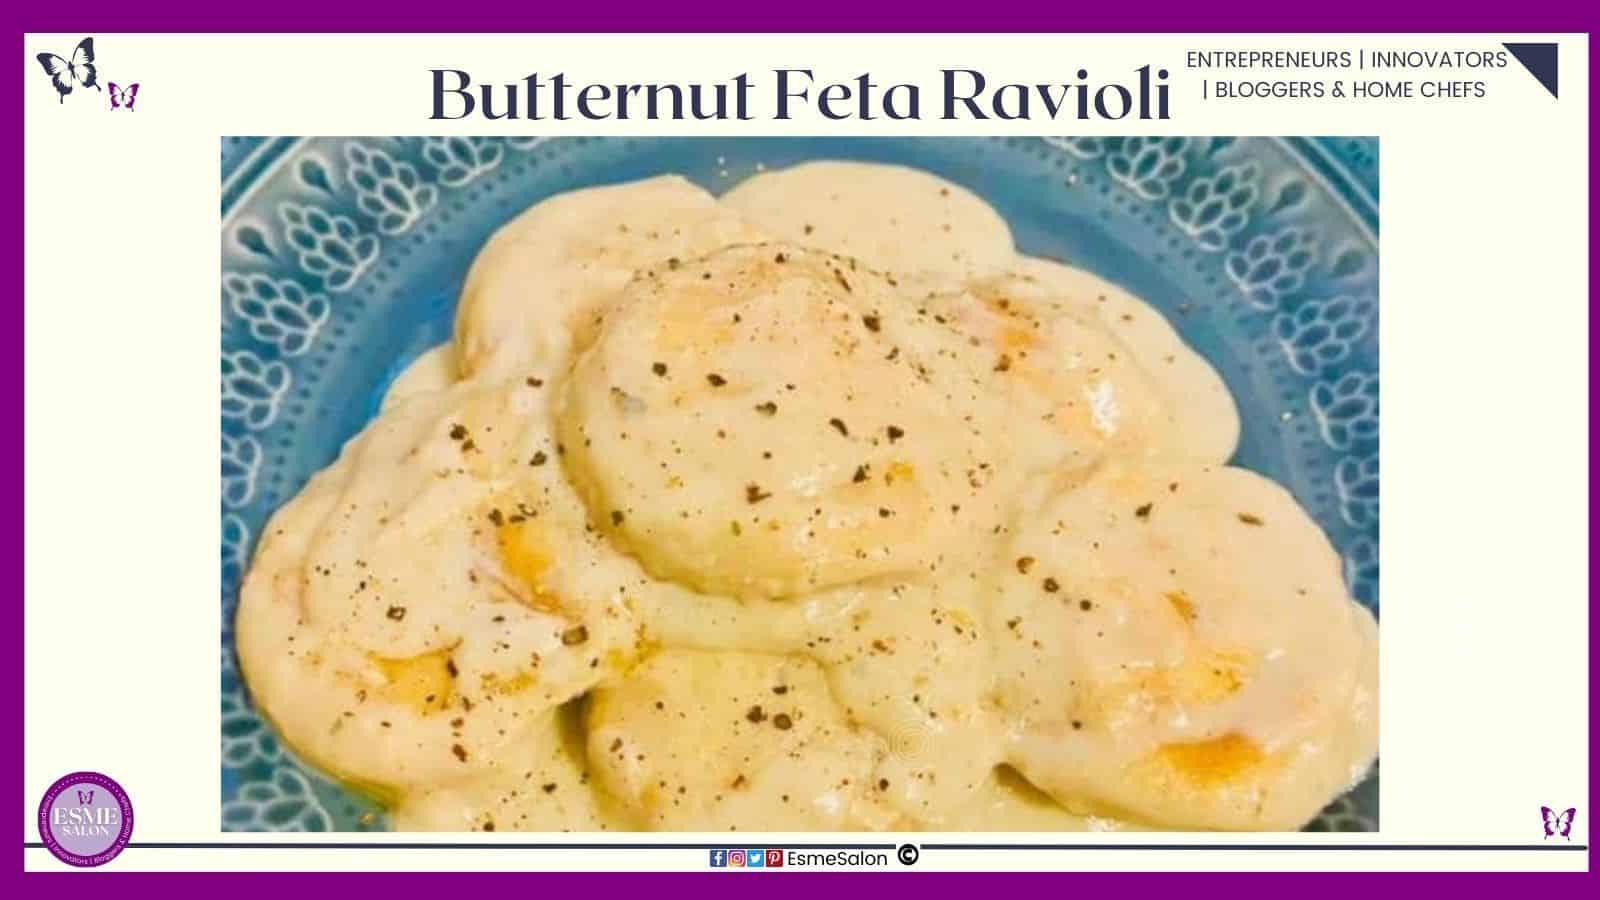 an image of a blue dinner plate filled with Butternut Feta Ravioli served with a brown butter cream sauce